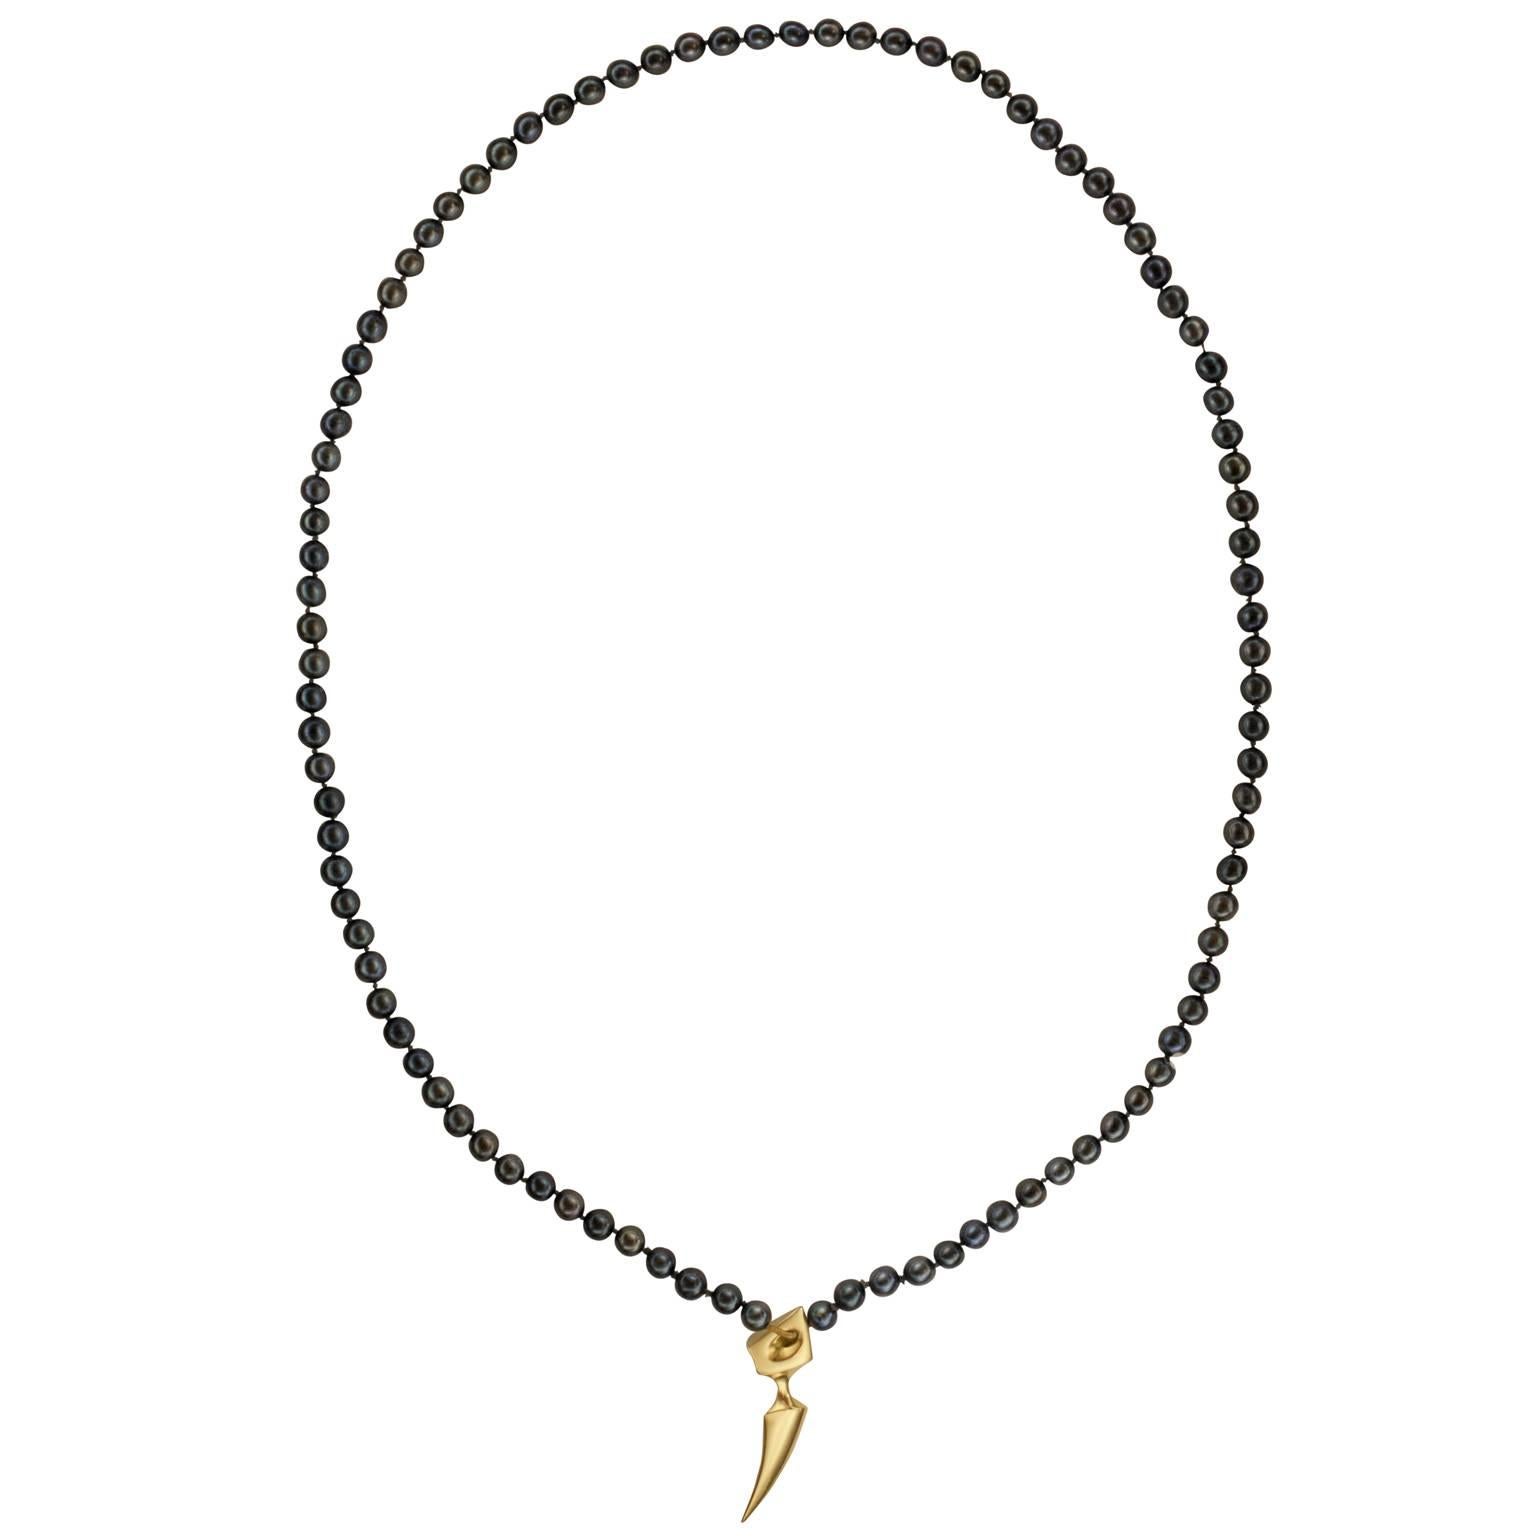 Subverting the connotations of classic pearls, this necklace teams enigmatic black pearls with the iconic Hannah Martin spur form. The fiercely sculptural 18 kt spur sits elegantly amongst the black pearls hanging over the chest, making this a